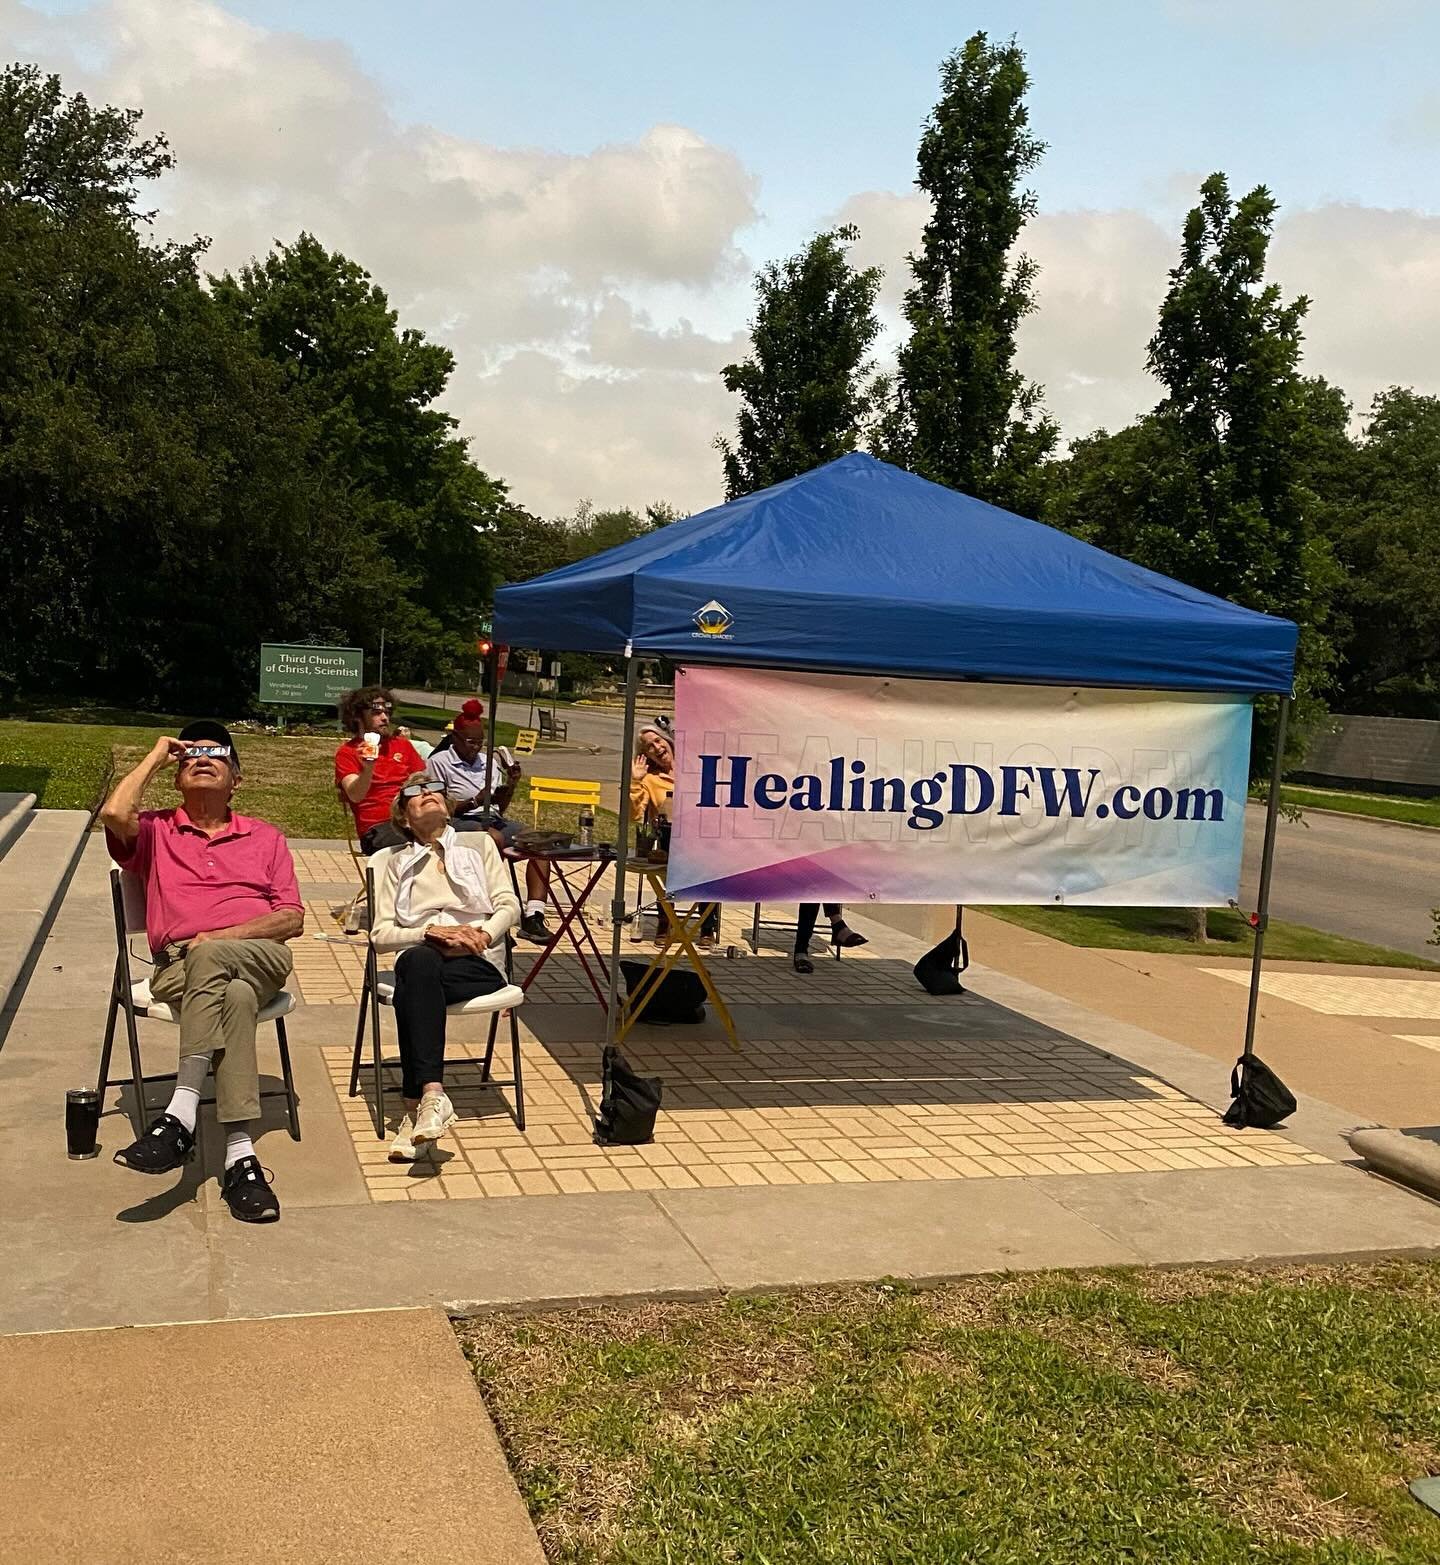 Eclipse watching at our outdoor tent Reading Room today!  Isn&rsquo;t God&rsquo;s universe amazing?  #solareclipse2024 #dallastexas #april8eclipse 
#thirdchurchofchristscientist #healingdfw